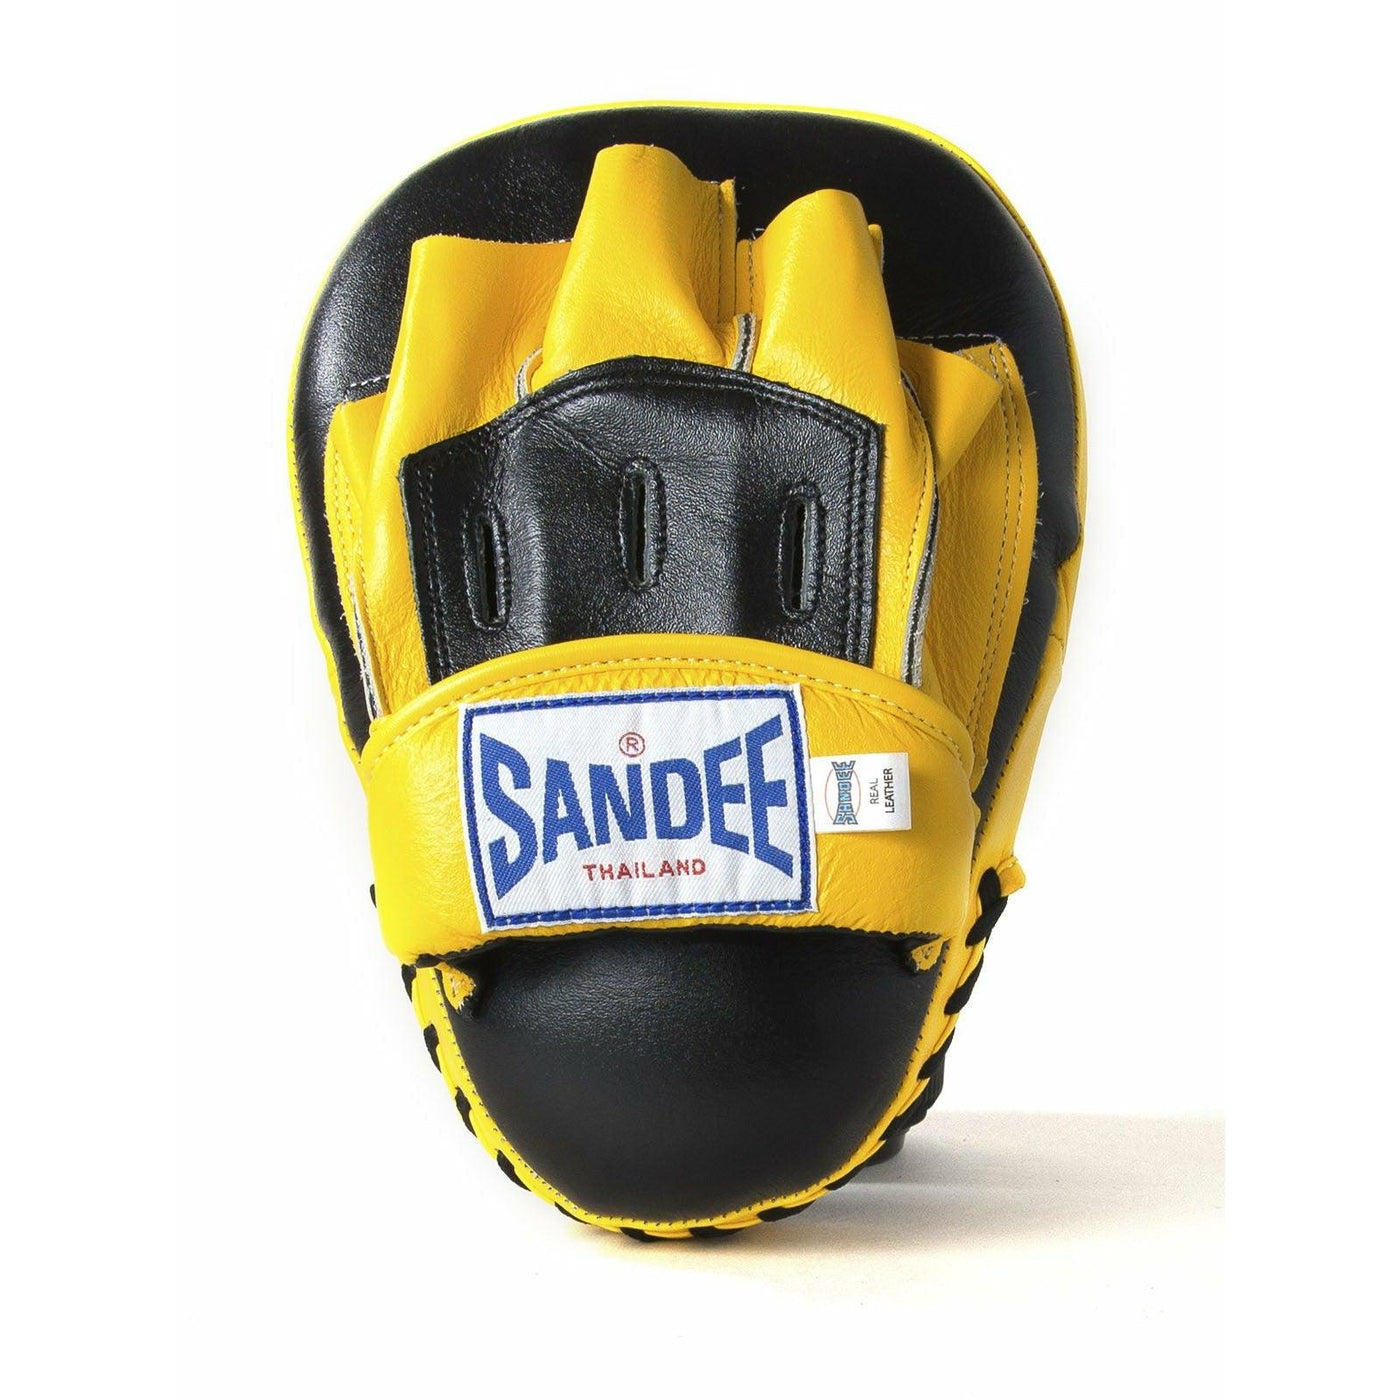 Sandee Curved Focus Mitts - Black & Yellow - Muay Thailand